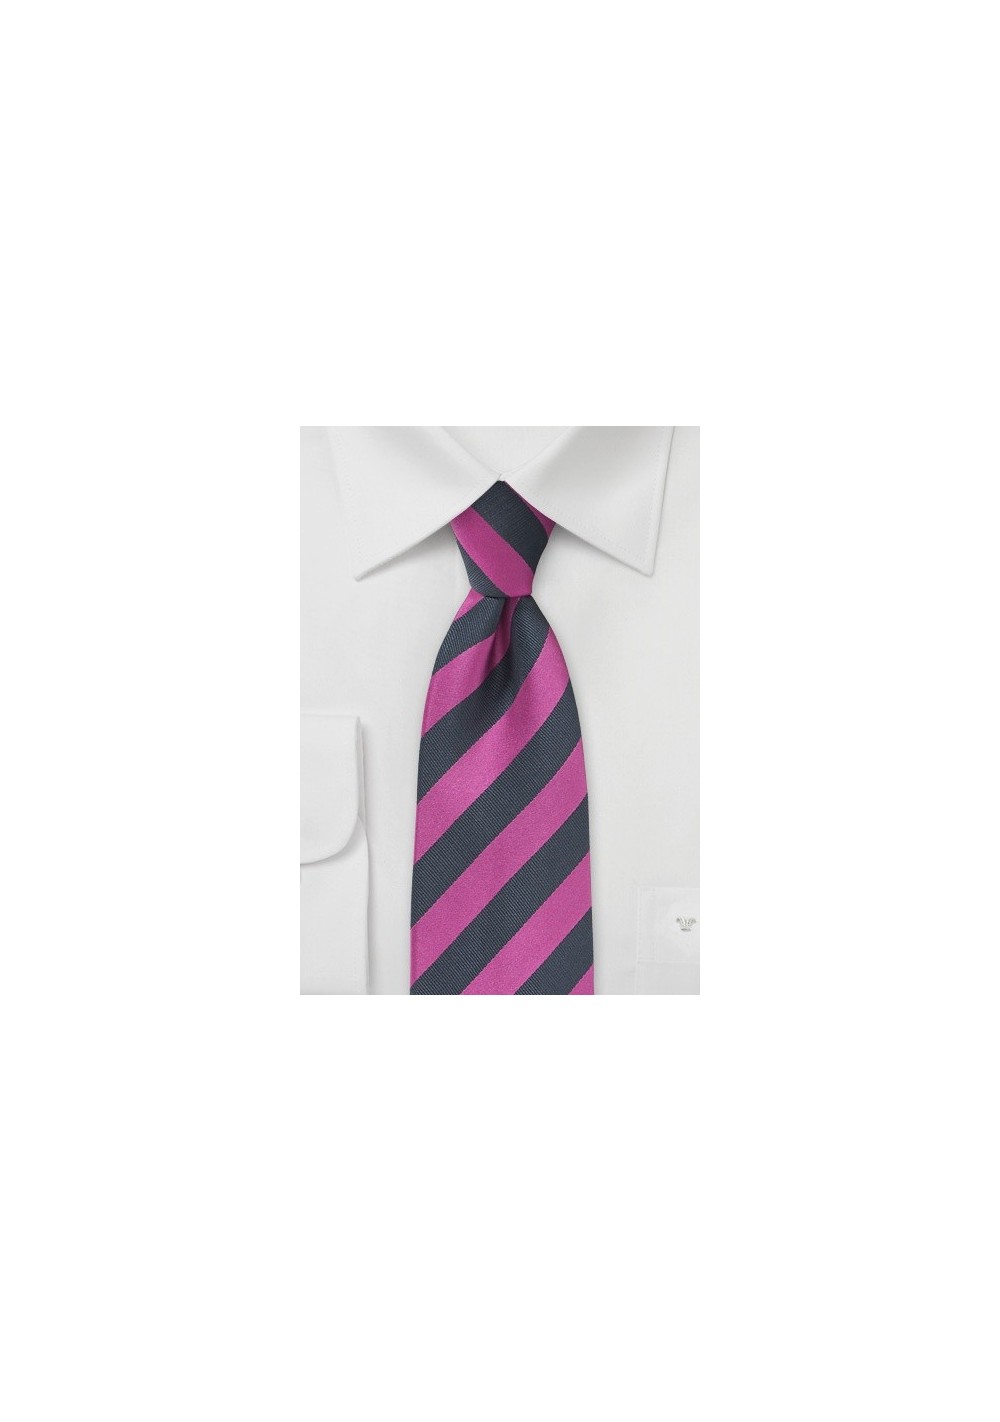 Striped Tie in Fuchsia and Navy